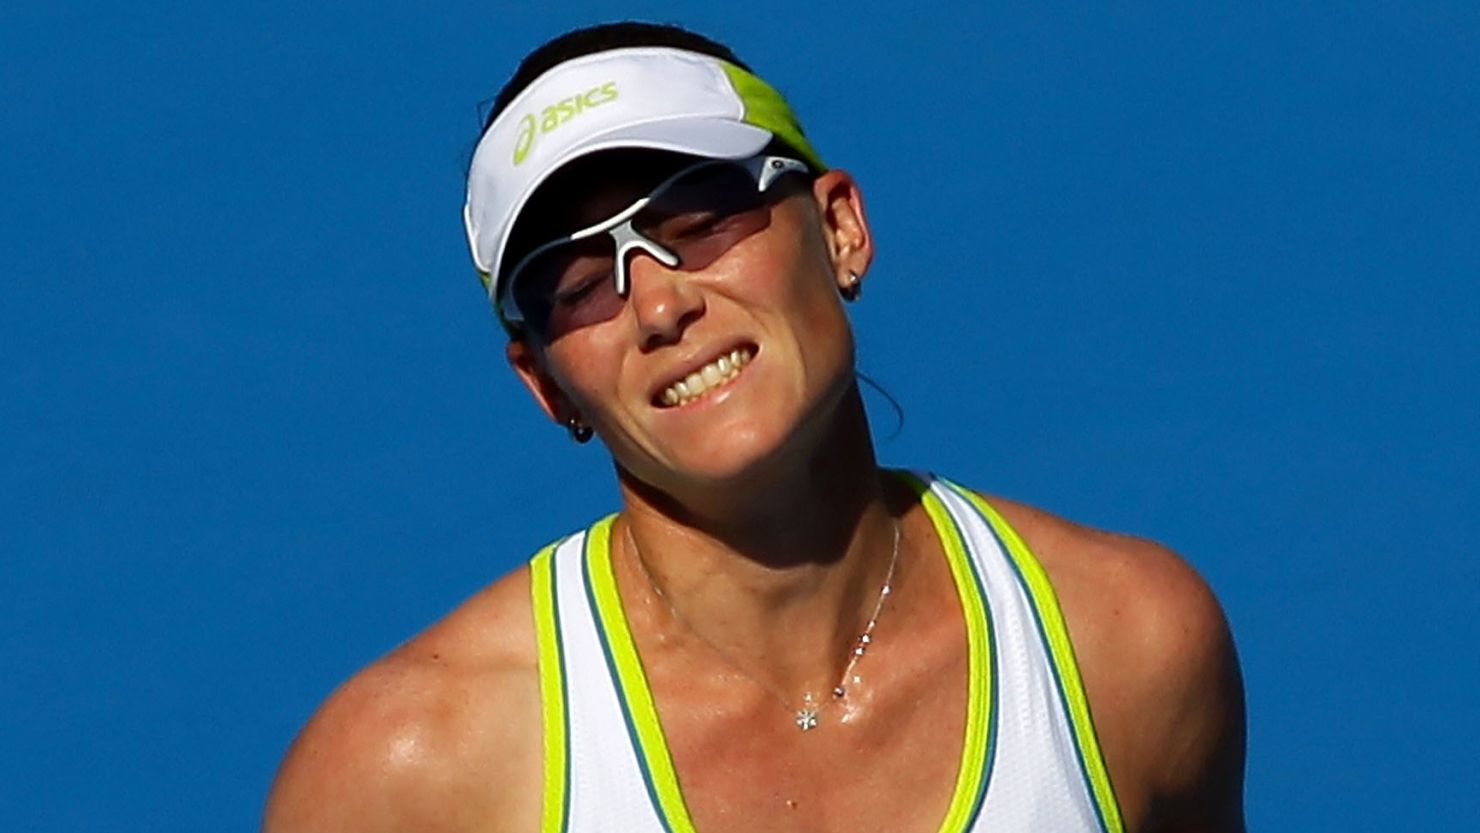 Australian tennis star Samantha Stosur has been eliminated in the early stages of her first two tournaments in 2012.